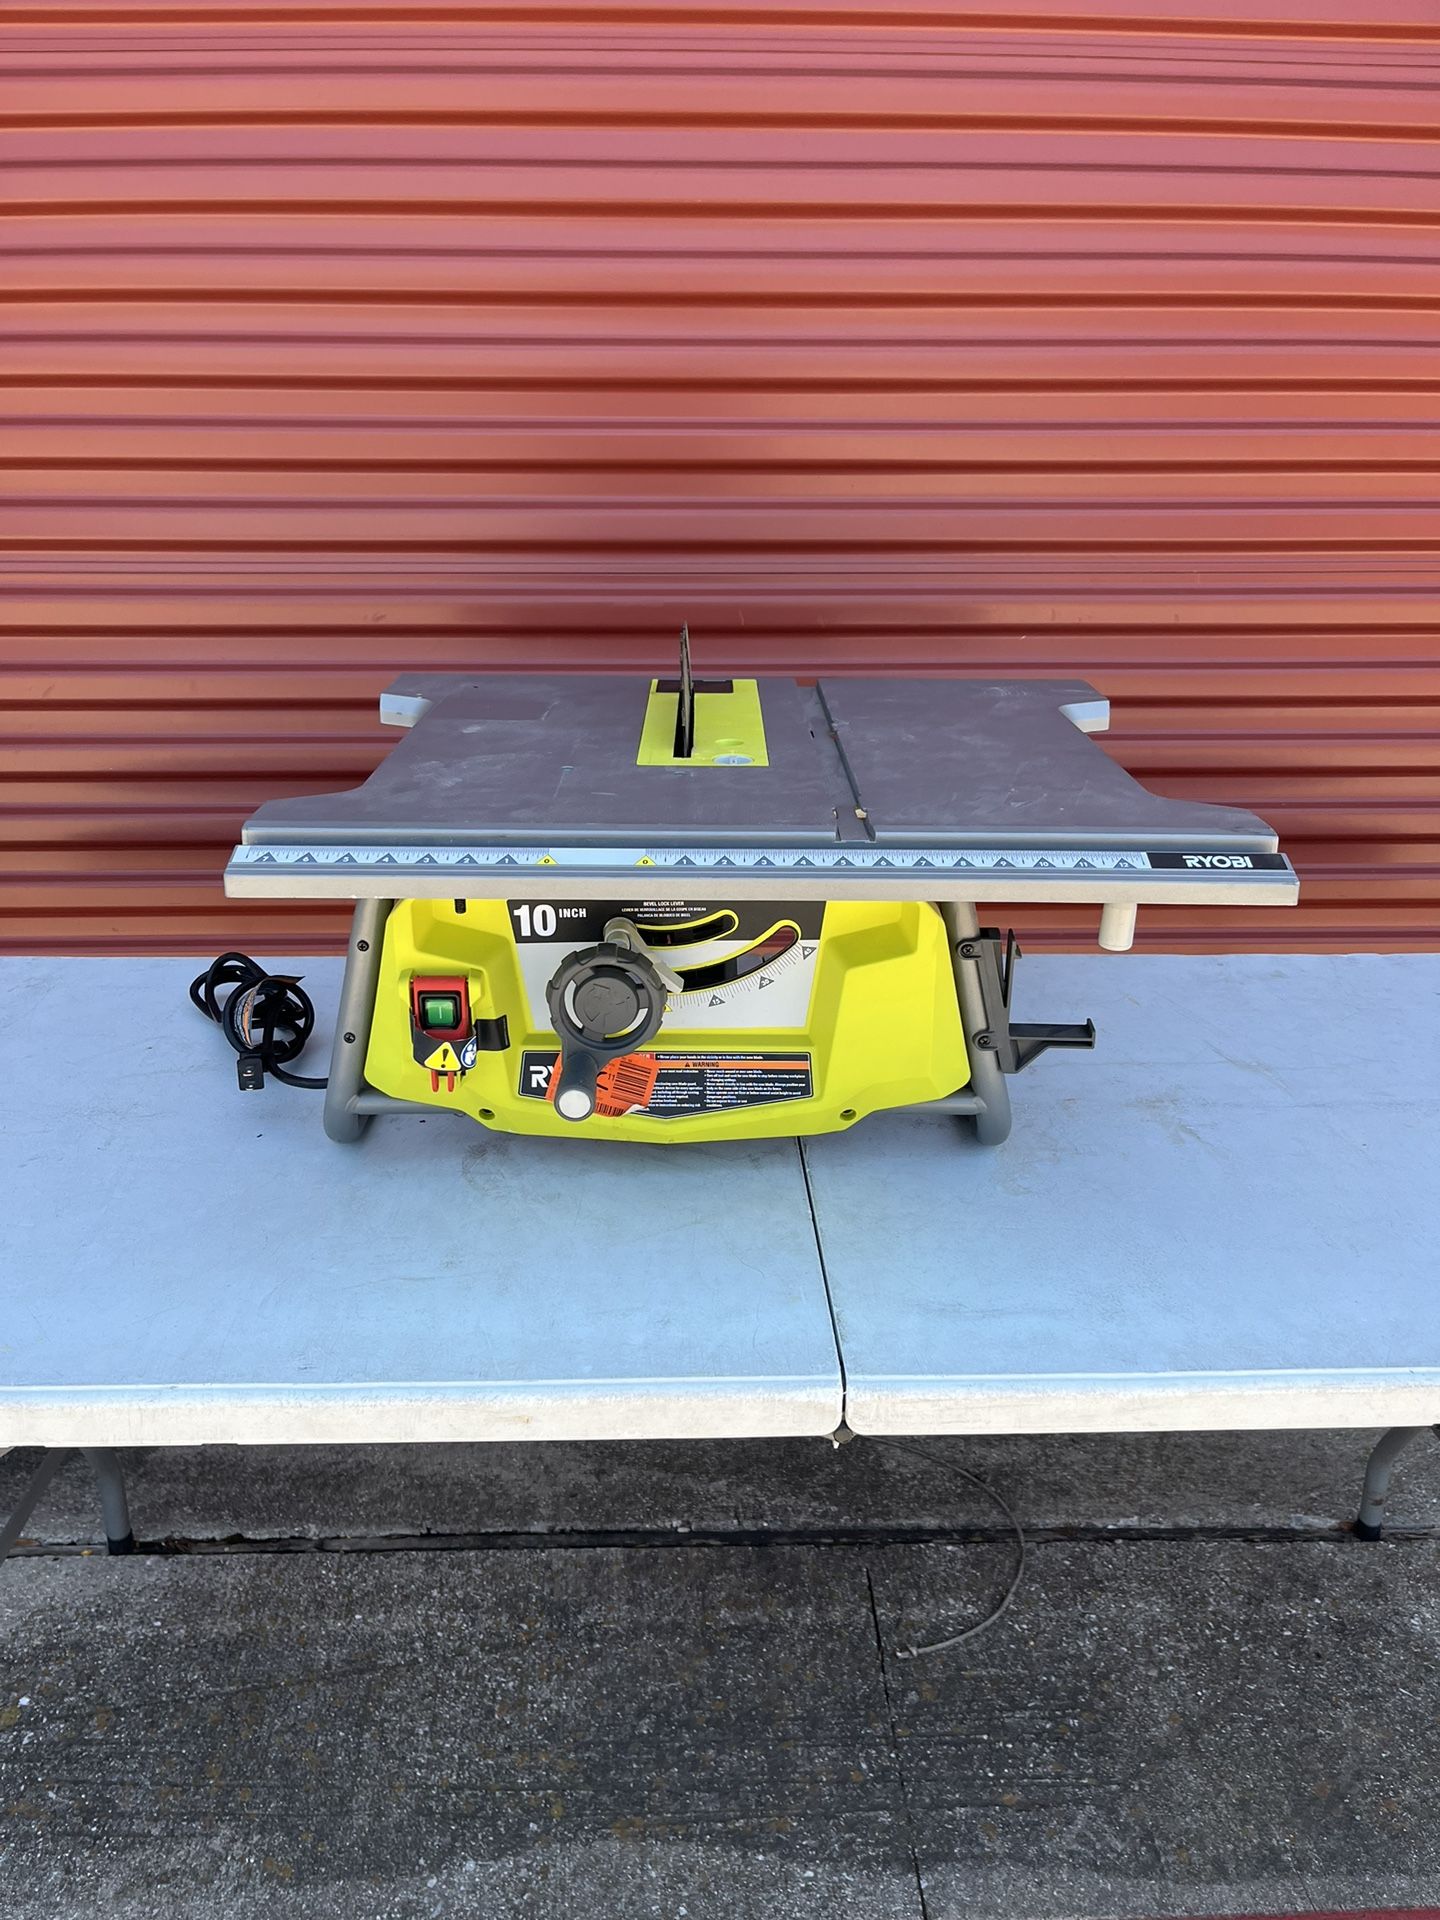 RYOBI 15 Amp 10 in. Compact Portable Corded Jobsite Table Saw (No Guide)